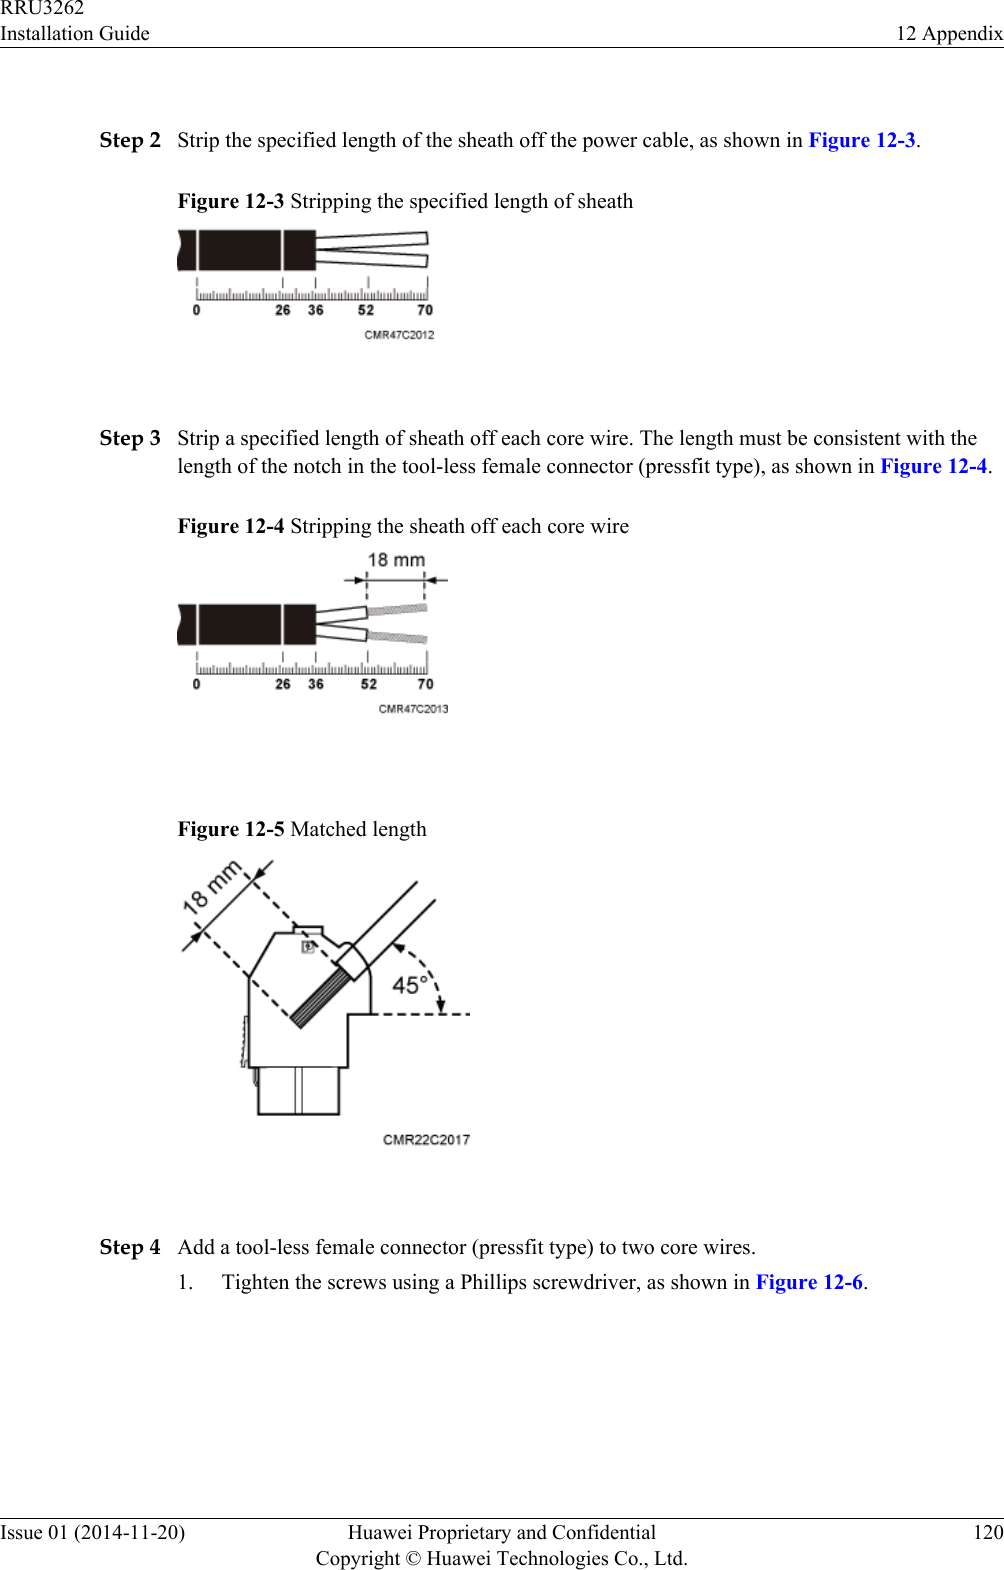  Step 2 Strip the specified length of the sheath off the power cable, as shown in Figure 12-3.Figure 12-3 Stripping the specified length of sheath Step 3 Strip a specified length of sheath off each core wire. The length must be consistent with thelength of the notch in the tool-less female connector (pressfit type), as shown in Figure 12-4.Figure 12-4 Stripping the sheath off each core wire Figure 12-5 Matched length Step 4 Add a tool-less female connector (pressfit type) to two core wires.1. Tighten the screws using a Phillips screwdriver, as shown in Figure 12-6.RRU3262Installation Guide 12 AppendixIssue 01 (2014-11-20) Huawei Proprietary and ConfidentialCopyright © Huawei Technologies Co., Ltd.120